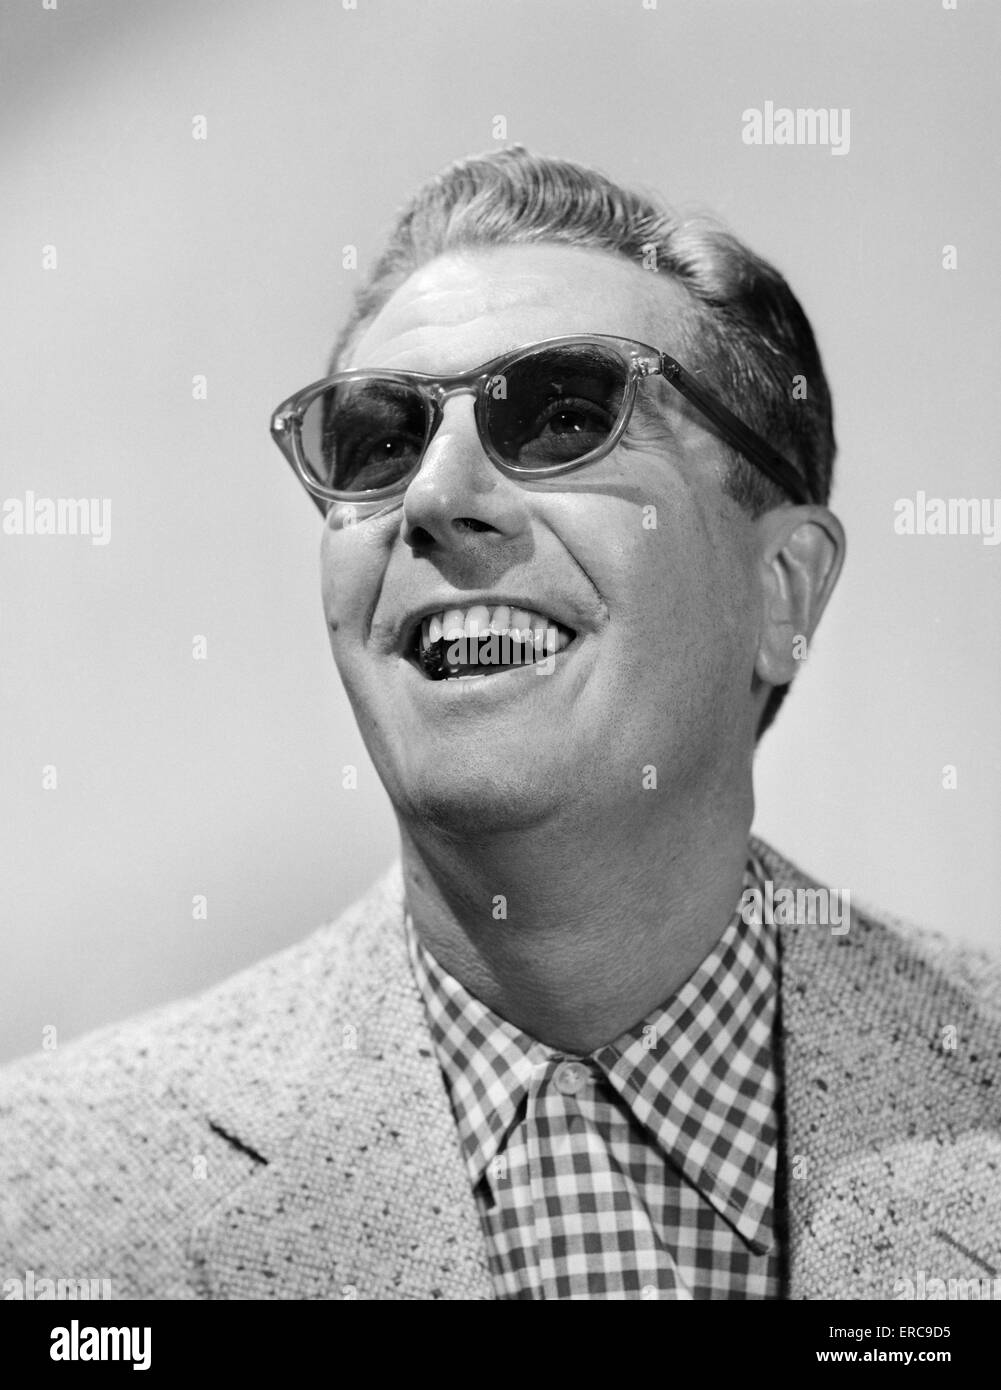 1950s MAN WEARING SUNGLASSES SMILING LOOKING UP Stock Photo - Alamy